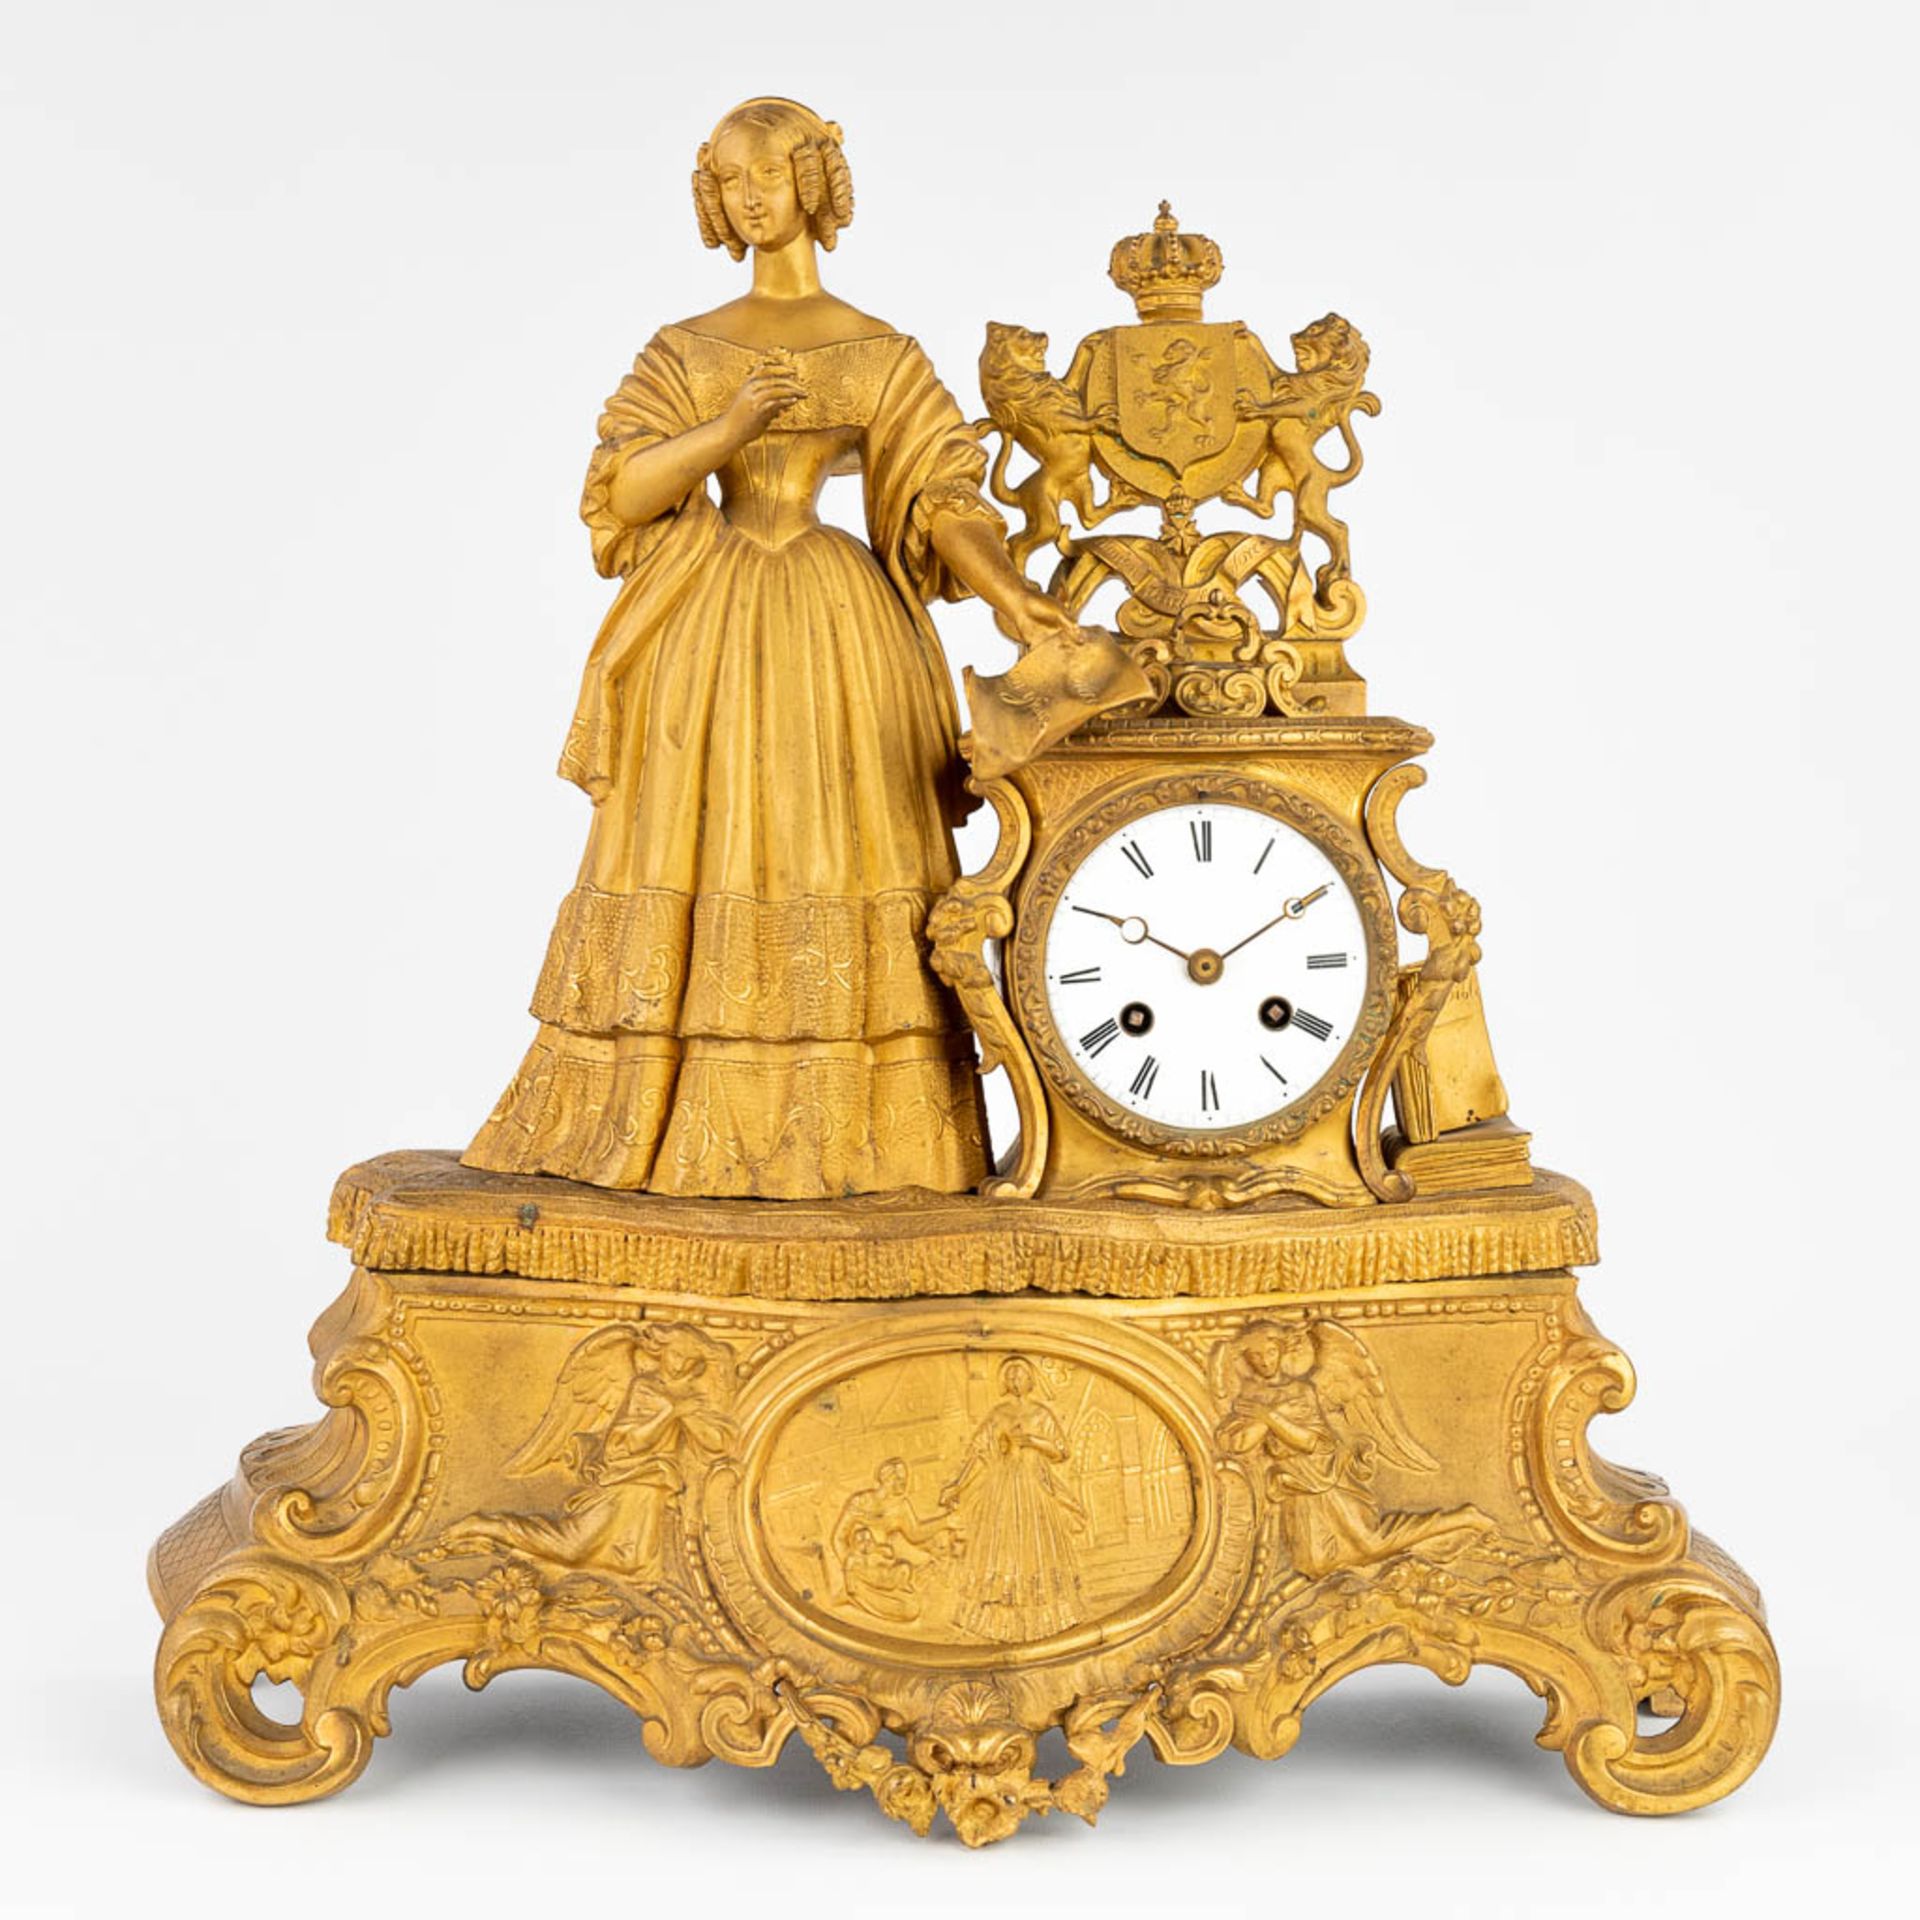 An antique mantle clock made of gilt spelter. 19th C. (44 x 45cm) - Image 11 of 16